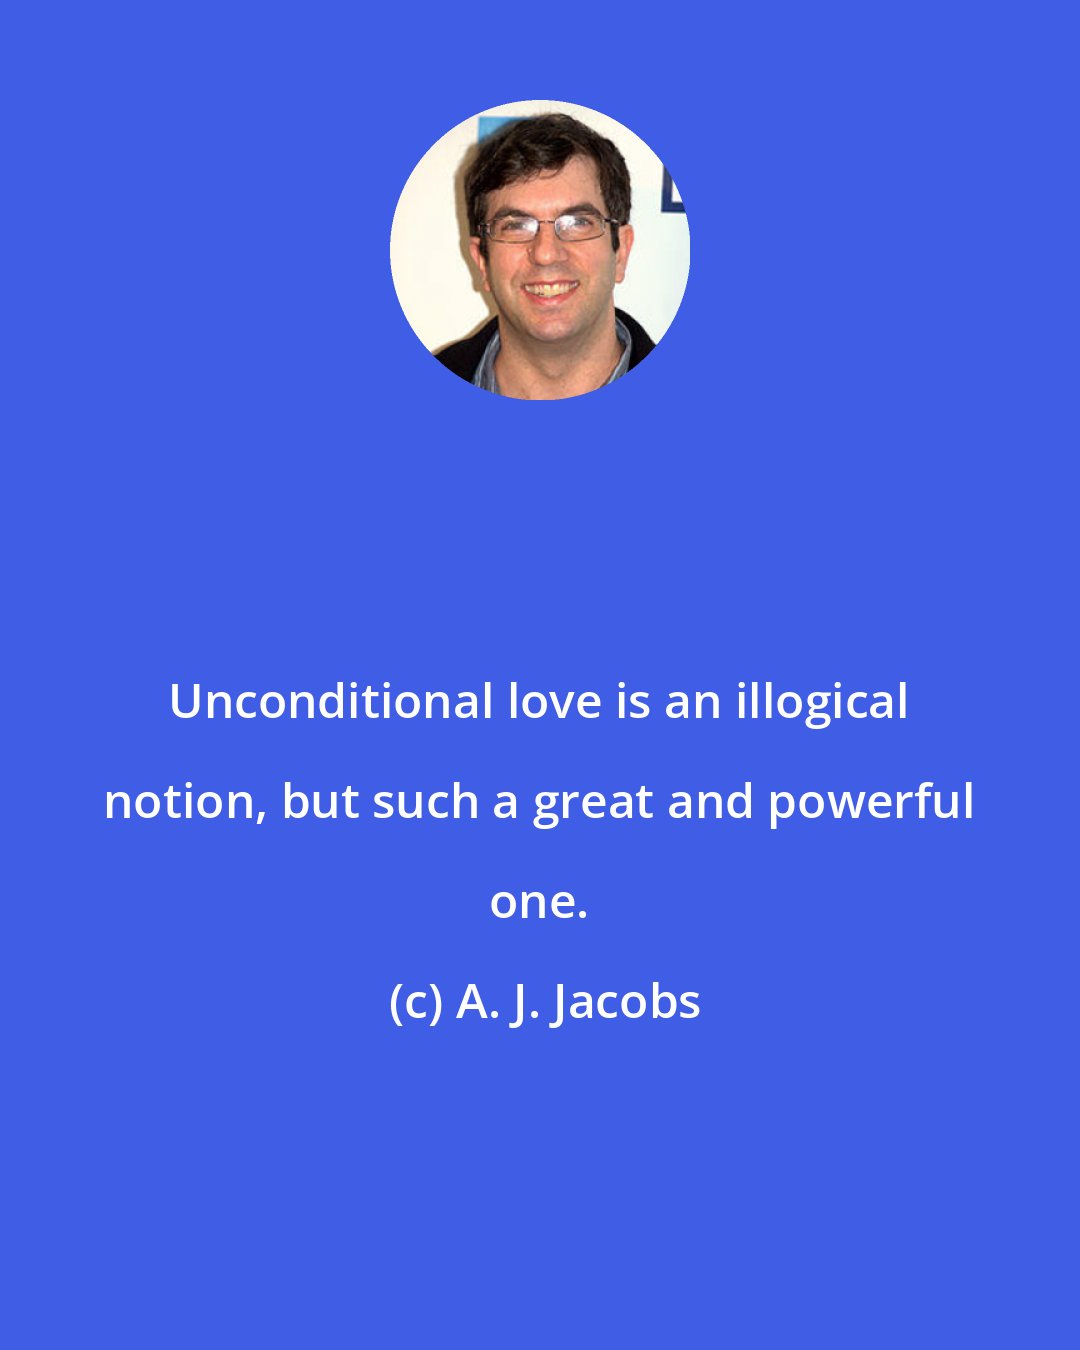 A. J. Jacobs: Unconditional love is an illogical notion, but such a great and powerful one.